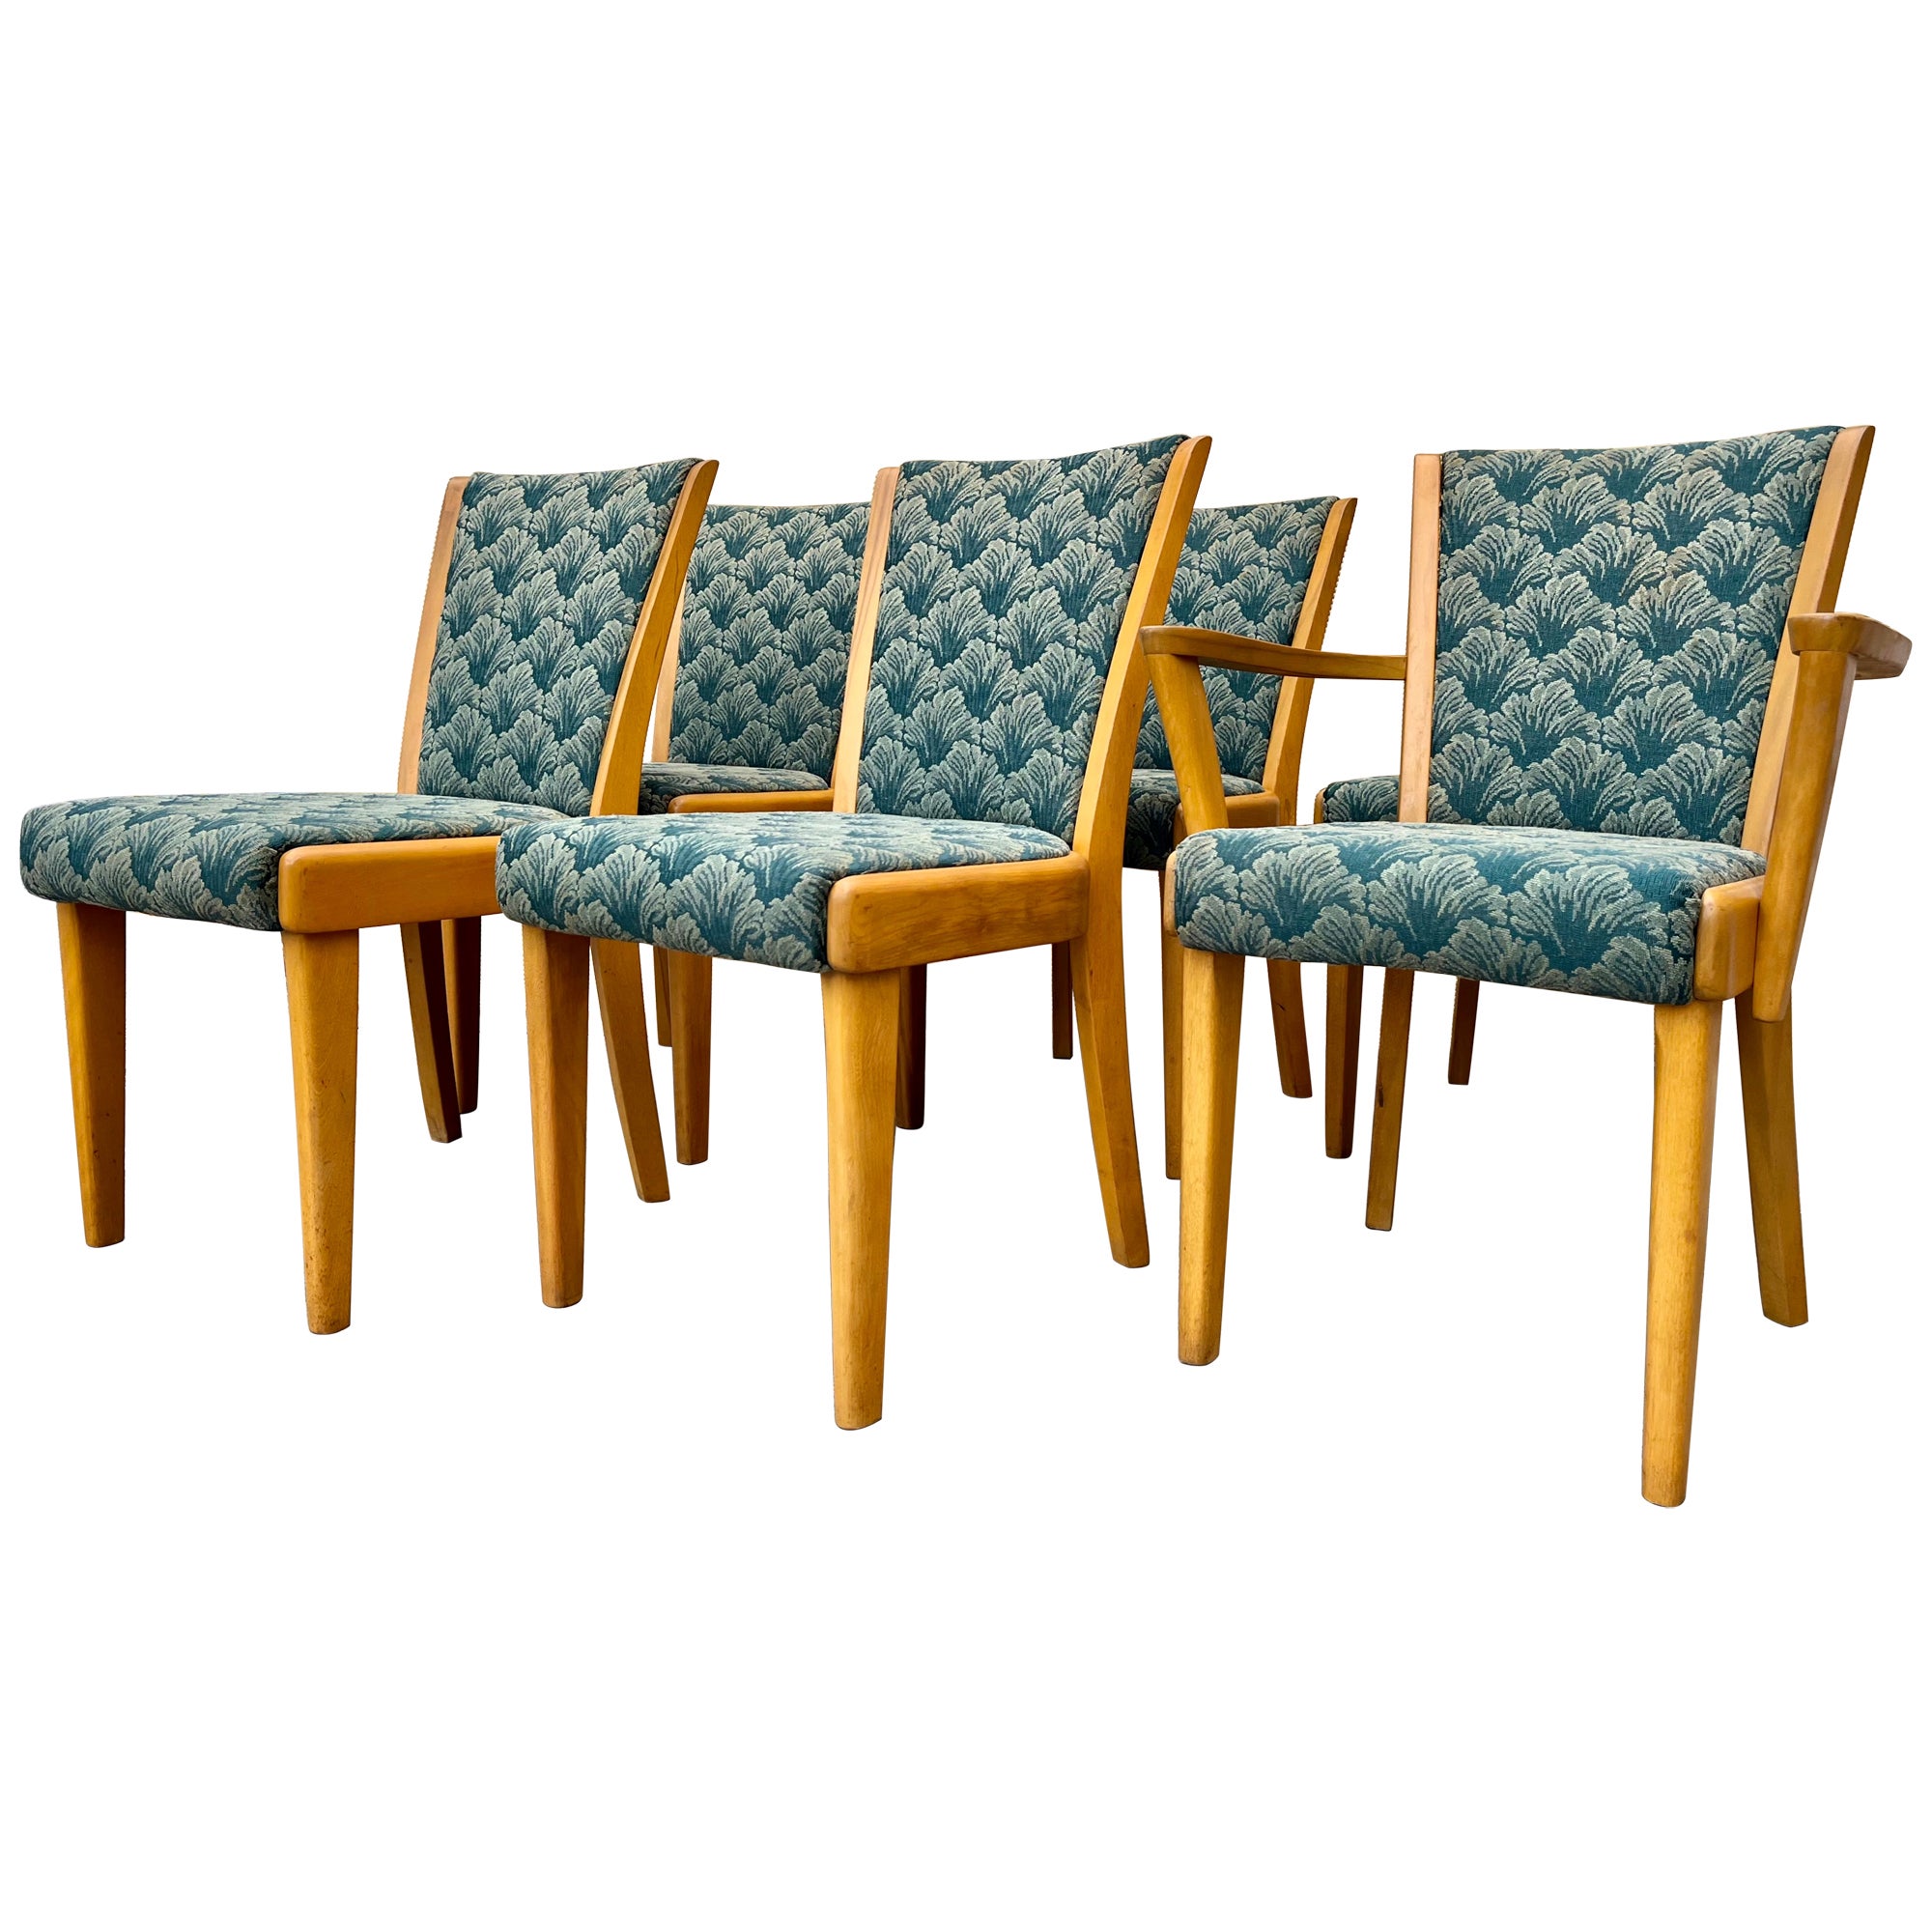 Set of 6 Mid Century Modern Heywood Wakefield Dining Room Chairs. Circa 1960s  For Sale